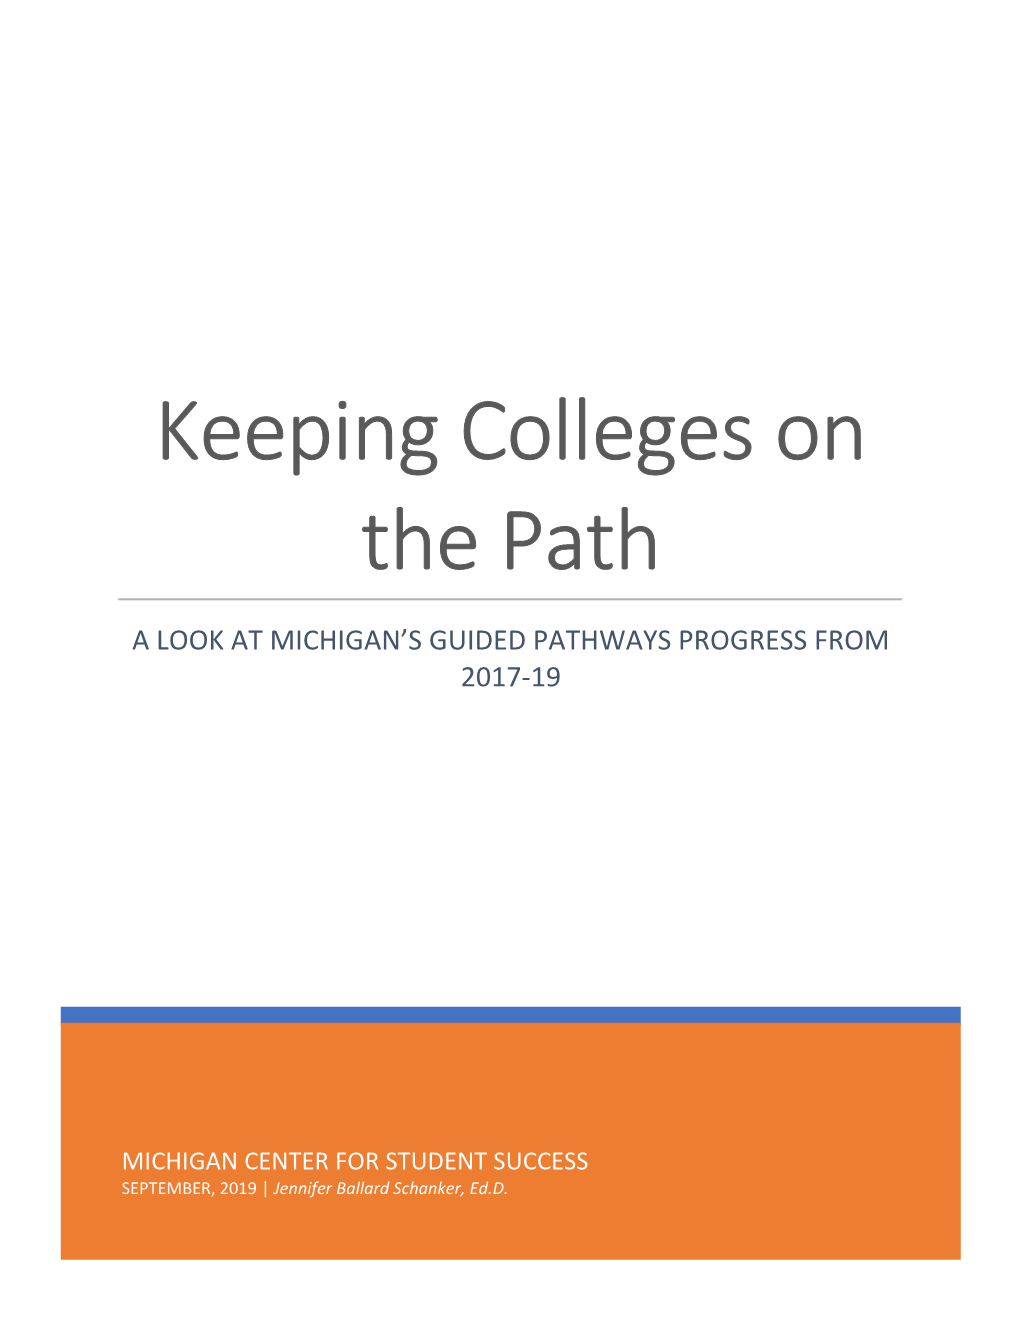 Keeping Colleges on the Path